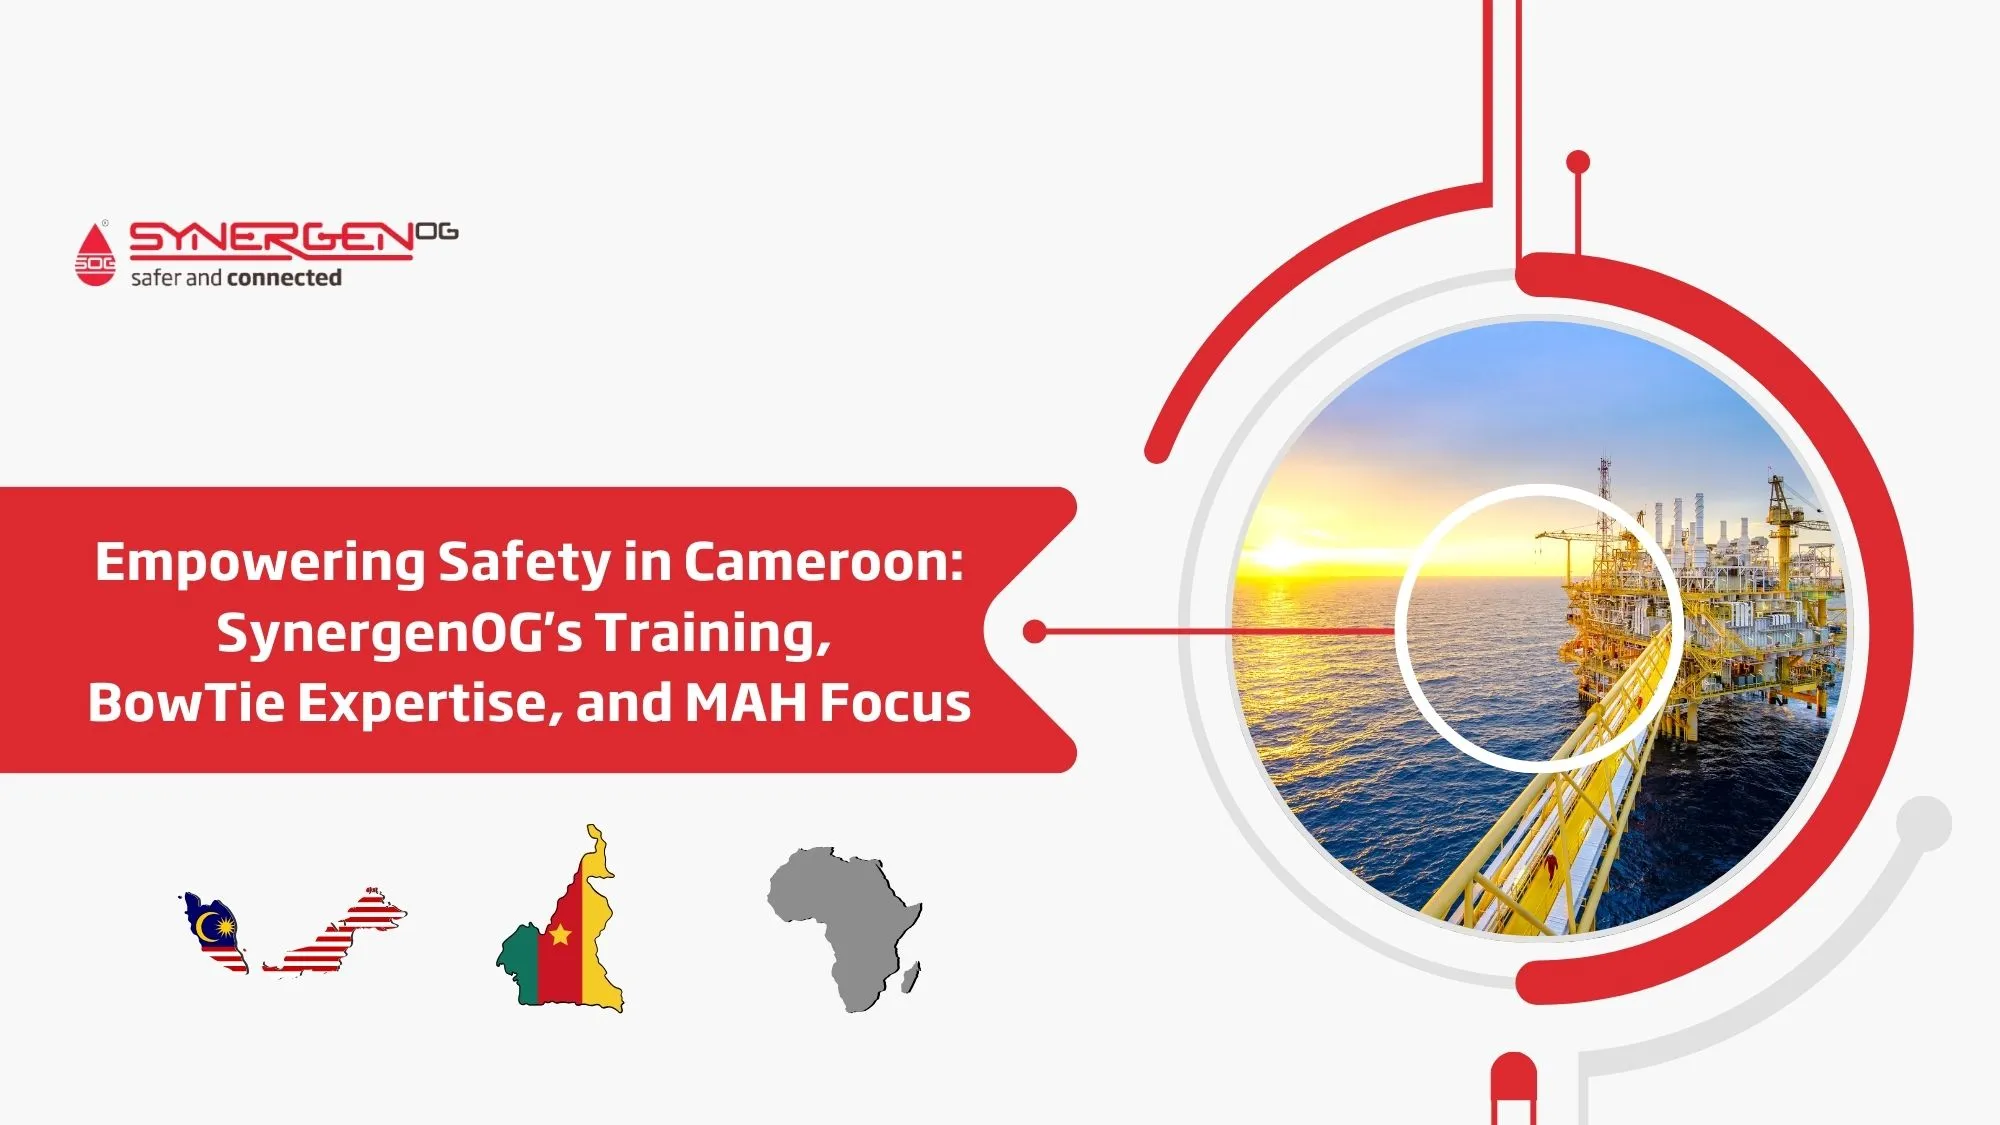 SynergenOG - Empowering Safety in Cameroon